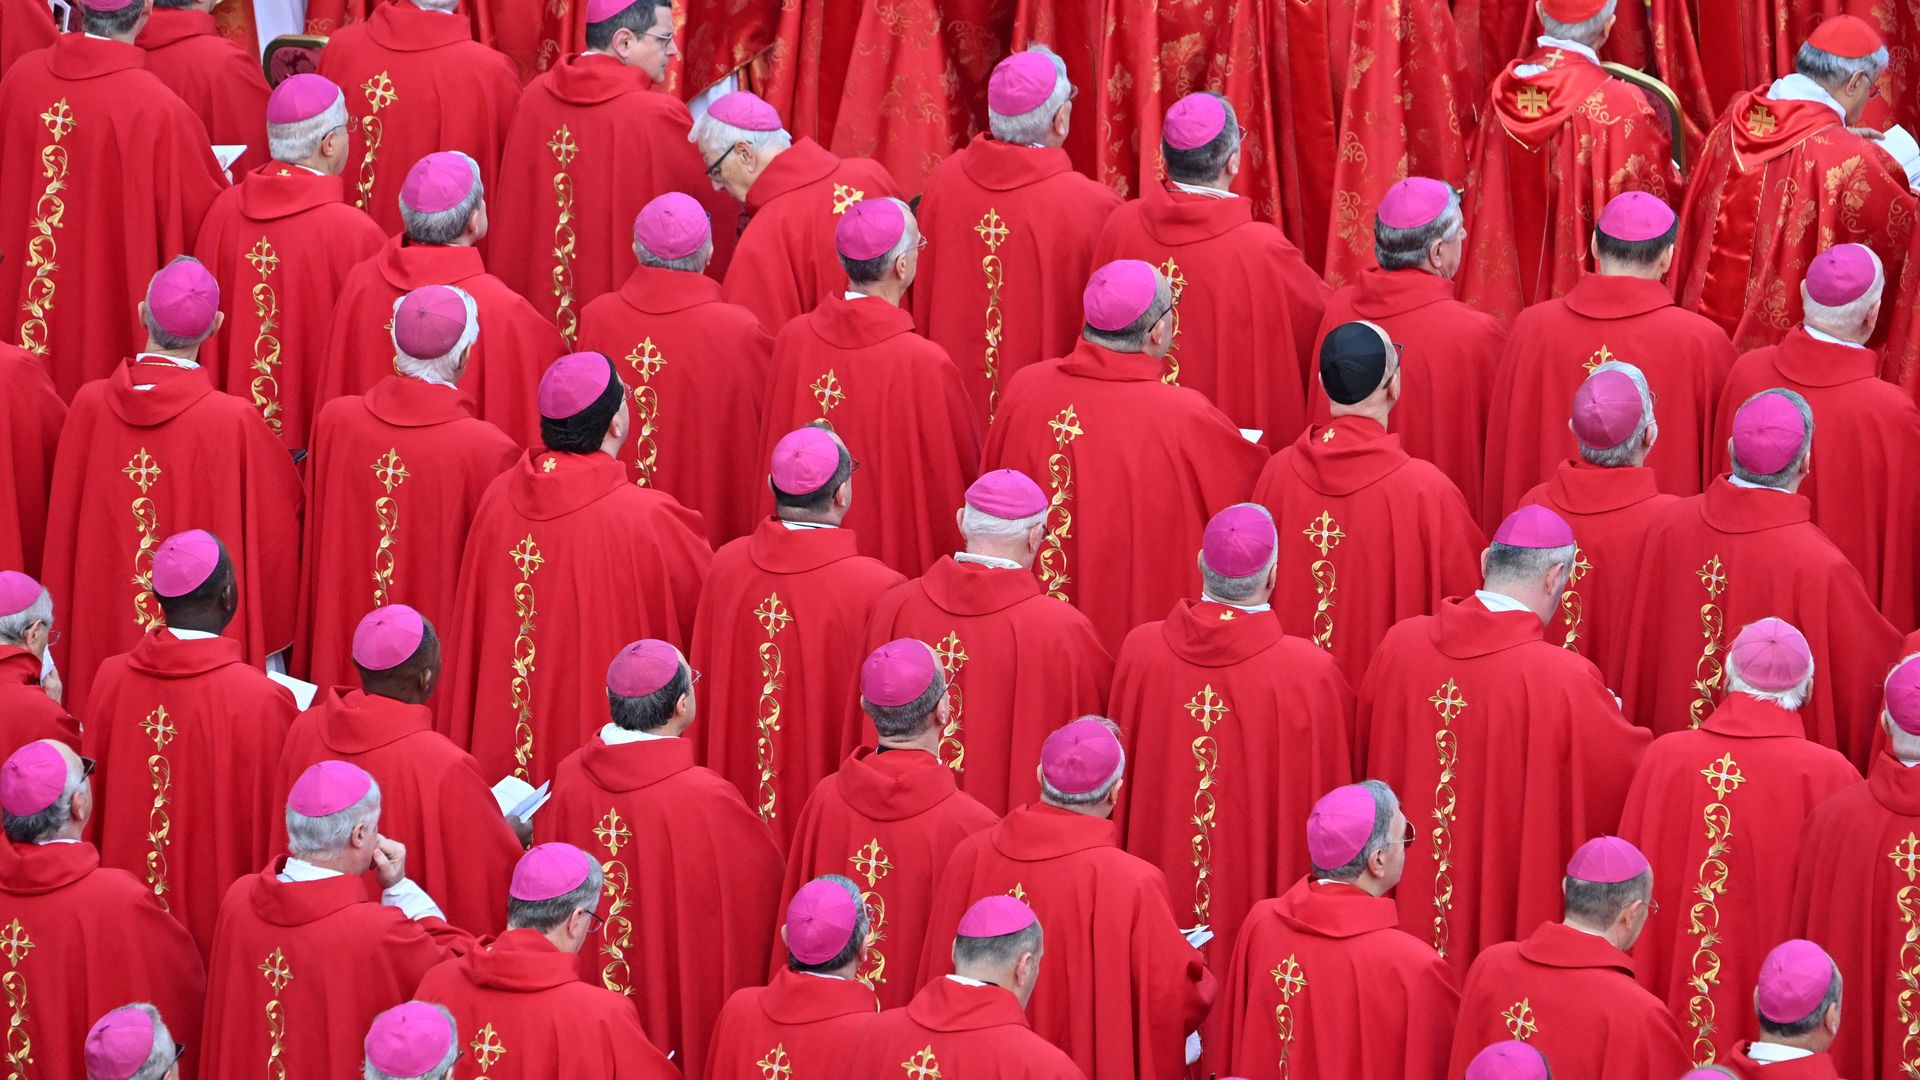 An aerial image of rows of Cardinals and Bishops wearing red robes standing shoulder to shoulder. 